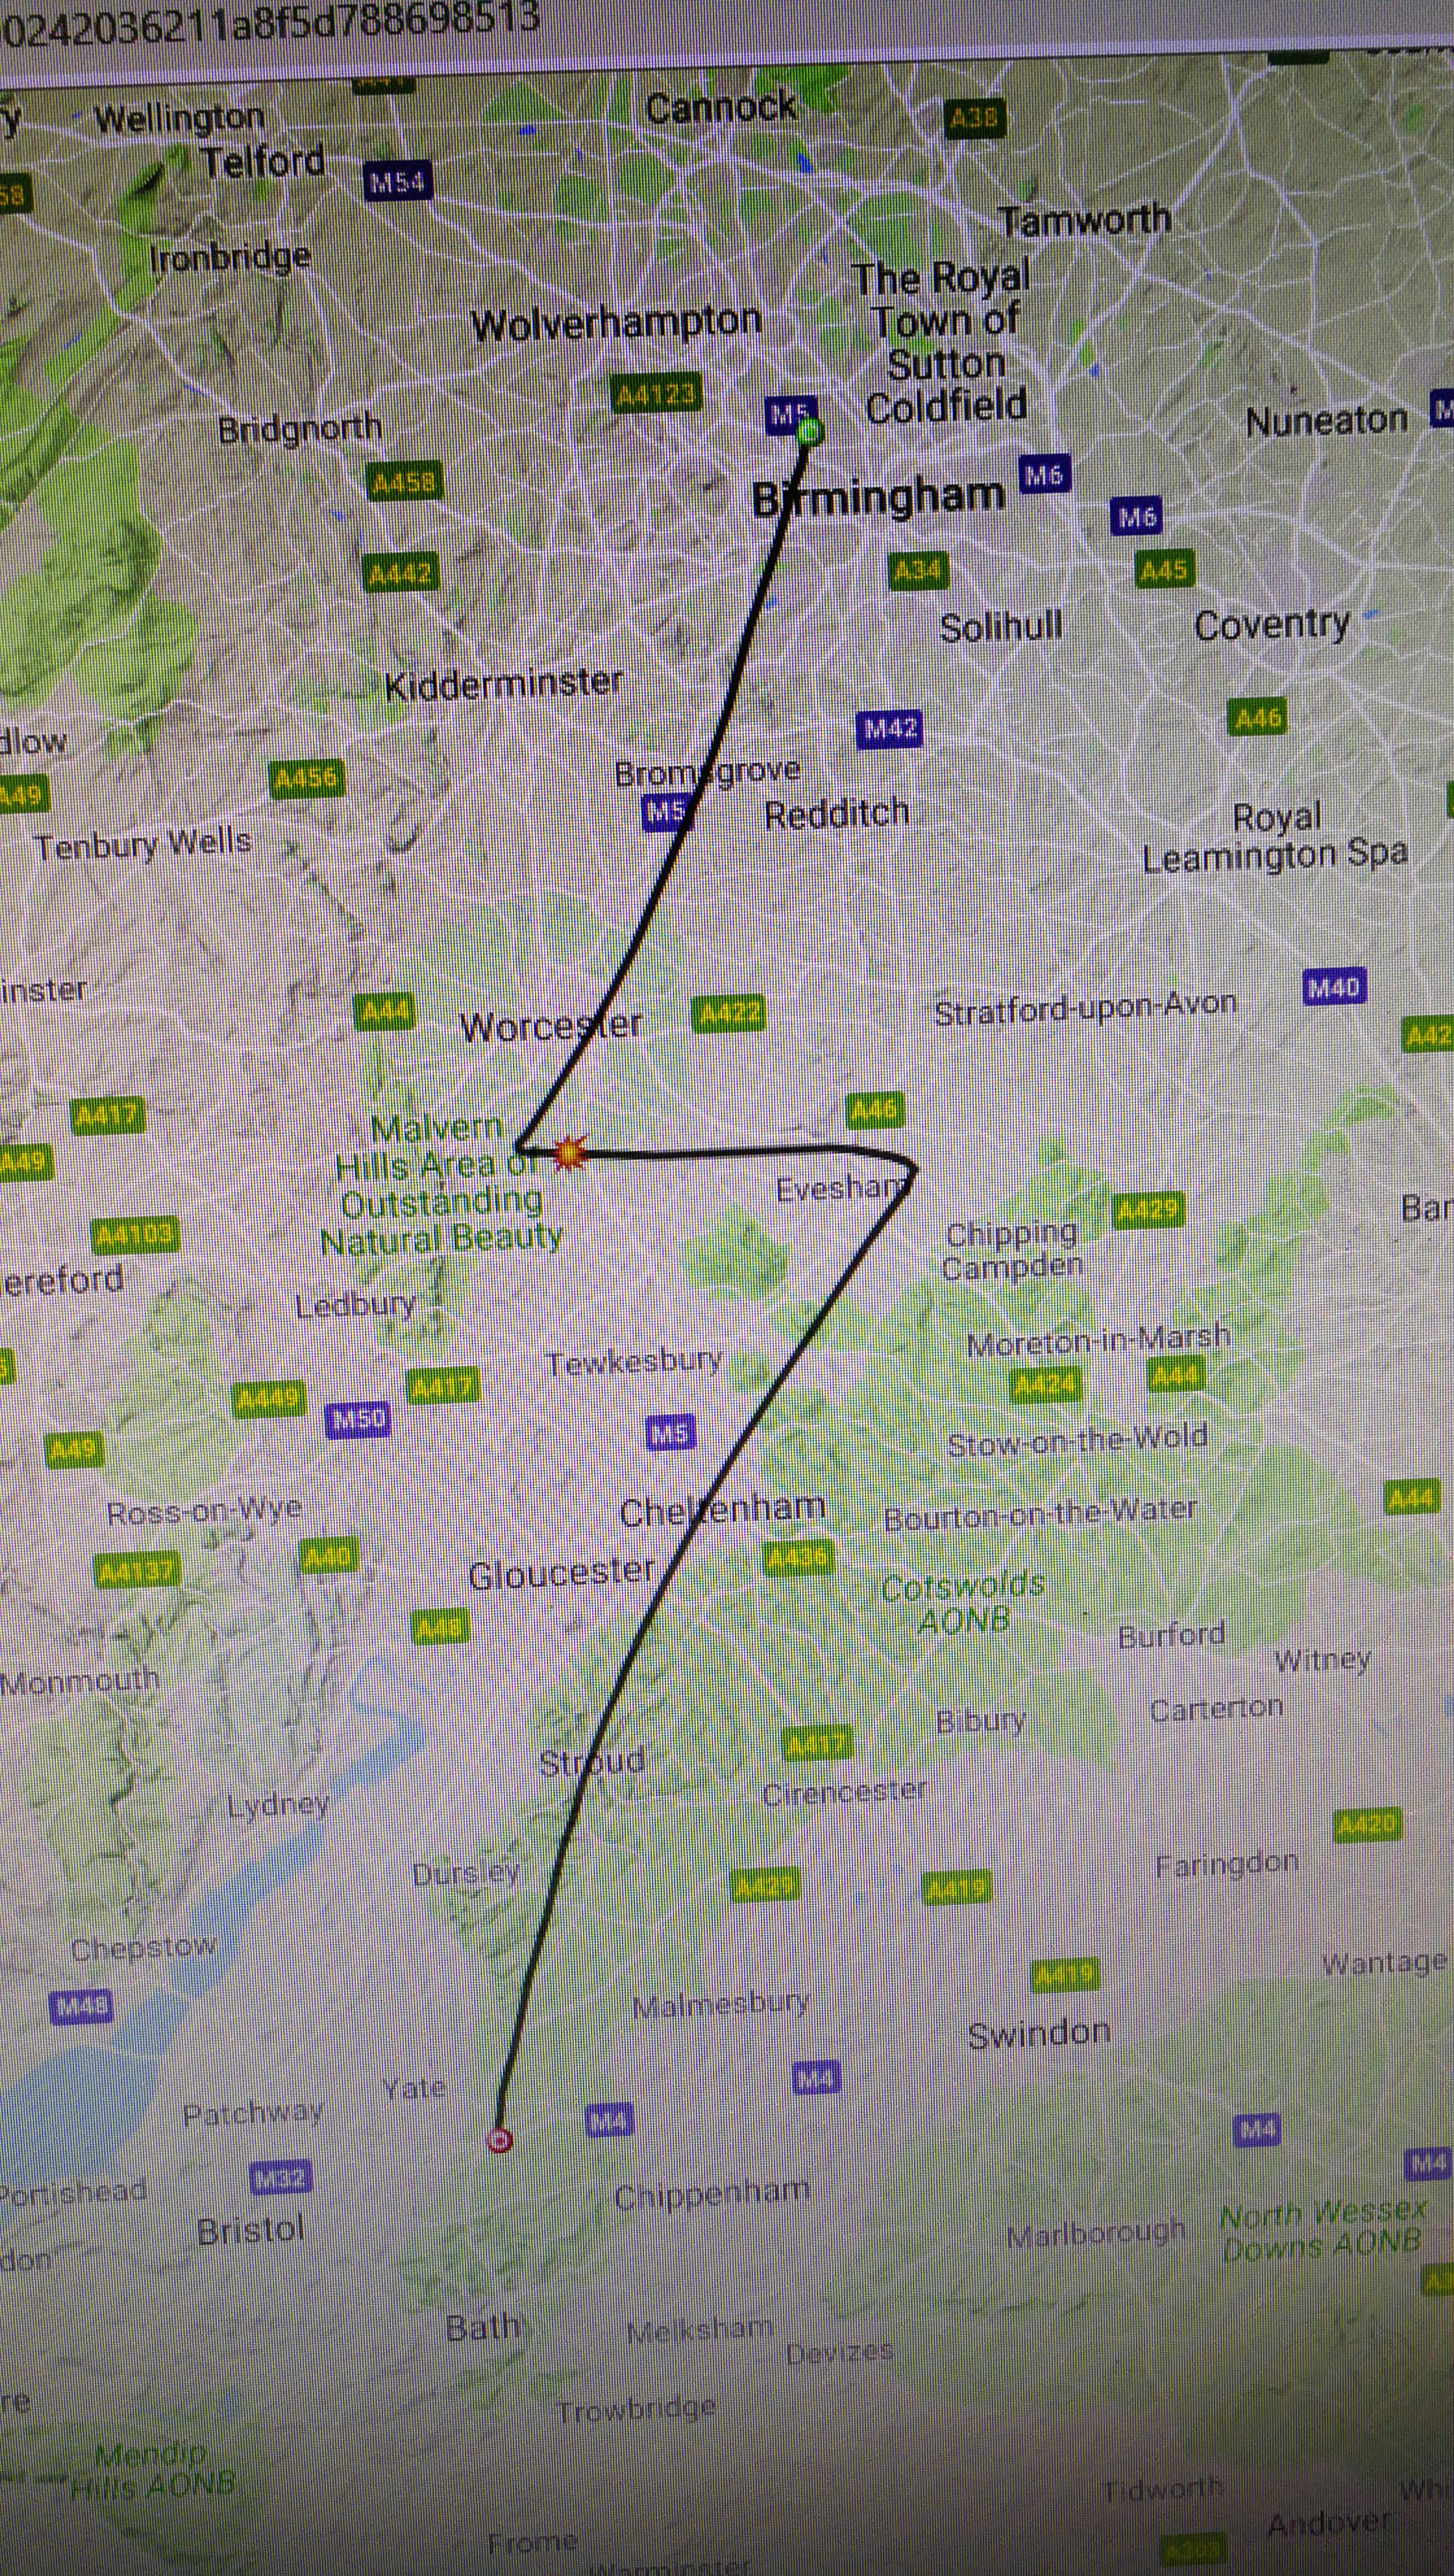 Route followed by the helium balloon after take-off near Bath to recovery 100 miles away near Birmingham